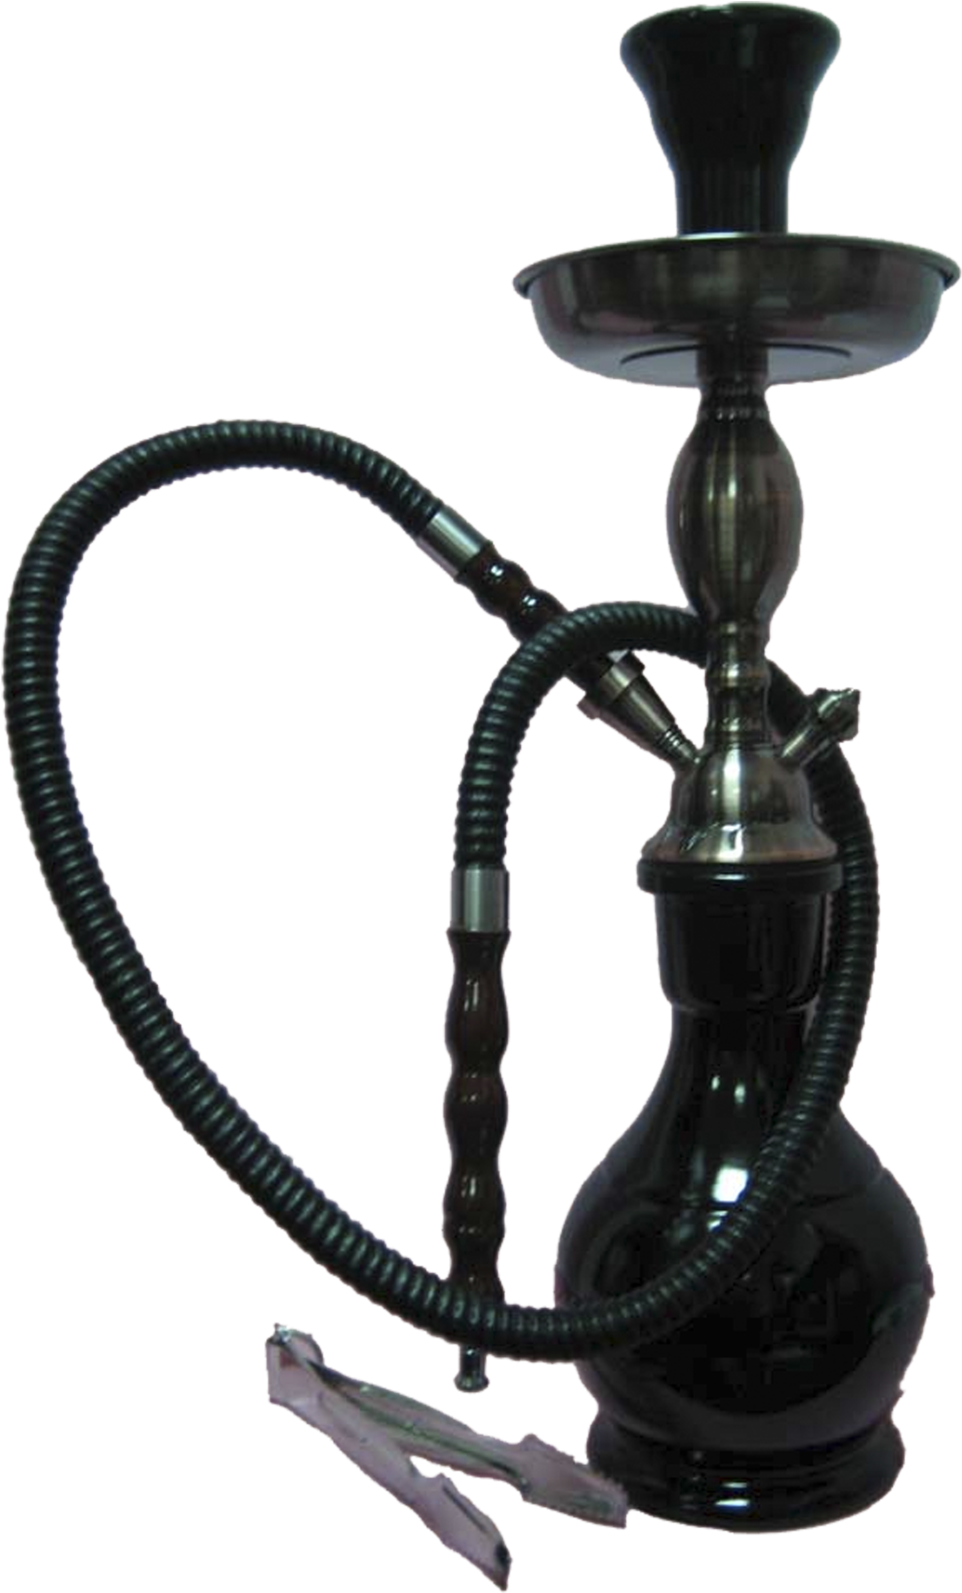 A Black And Silver Hookah